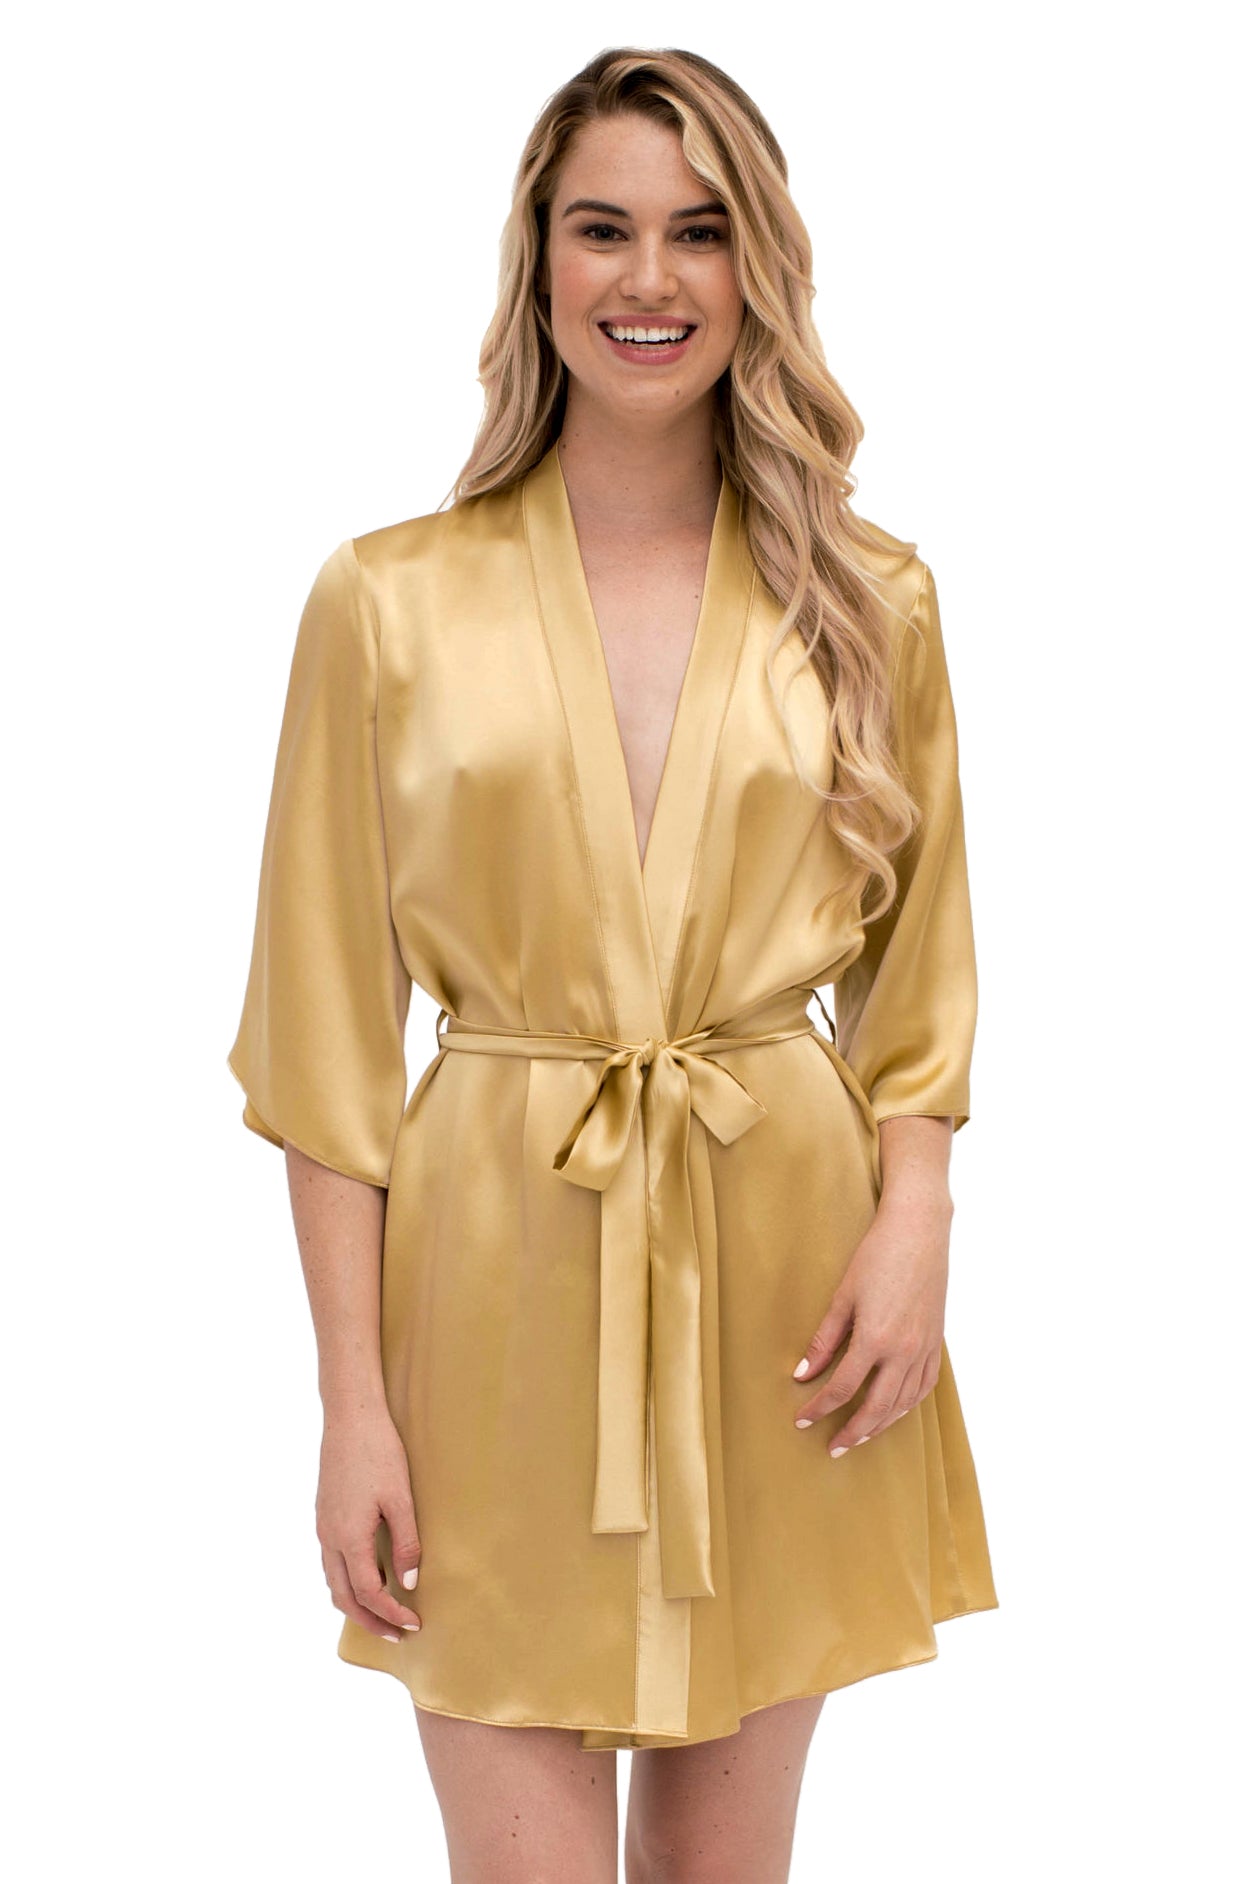 Angela Friedman gold silk robes and dressing gowns